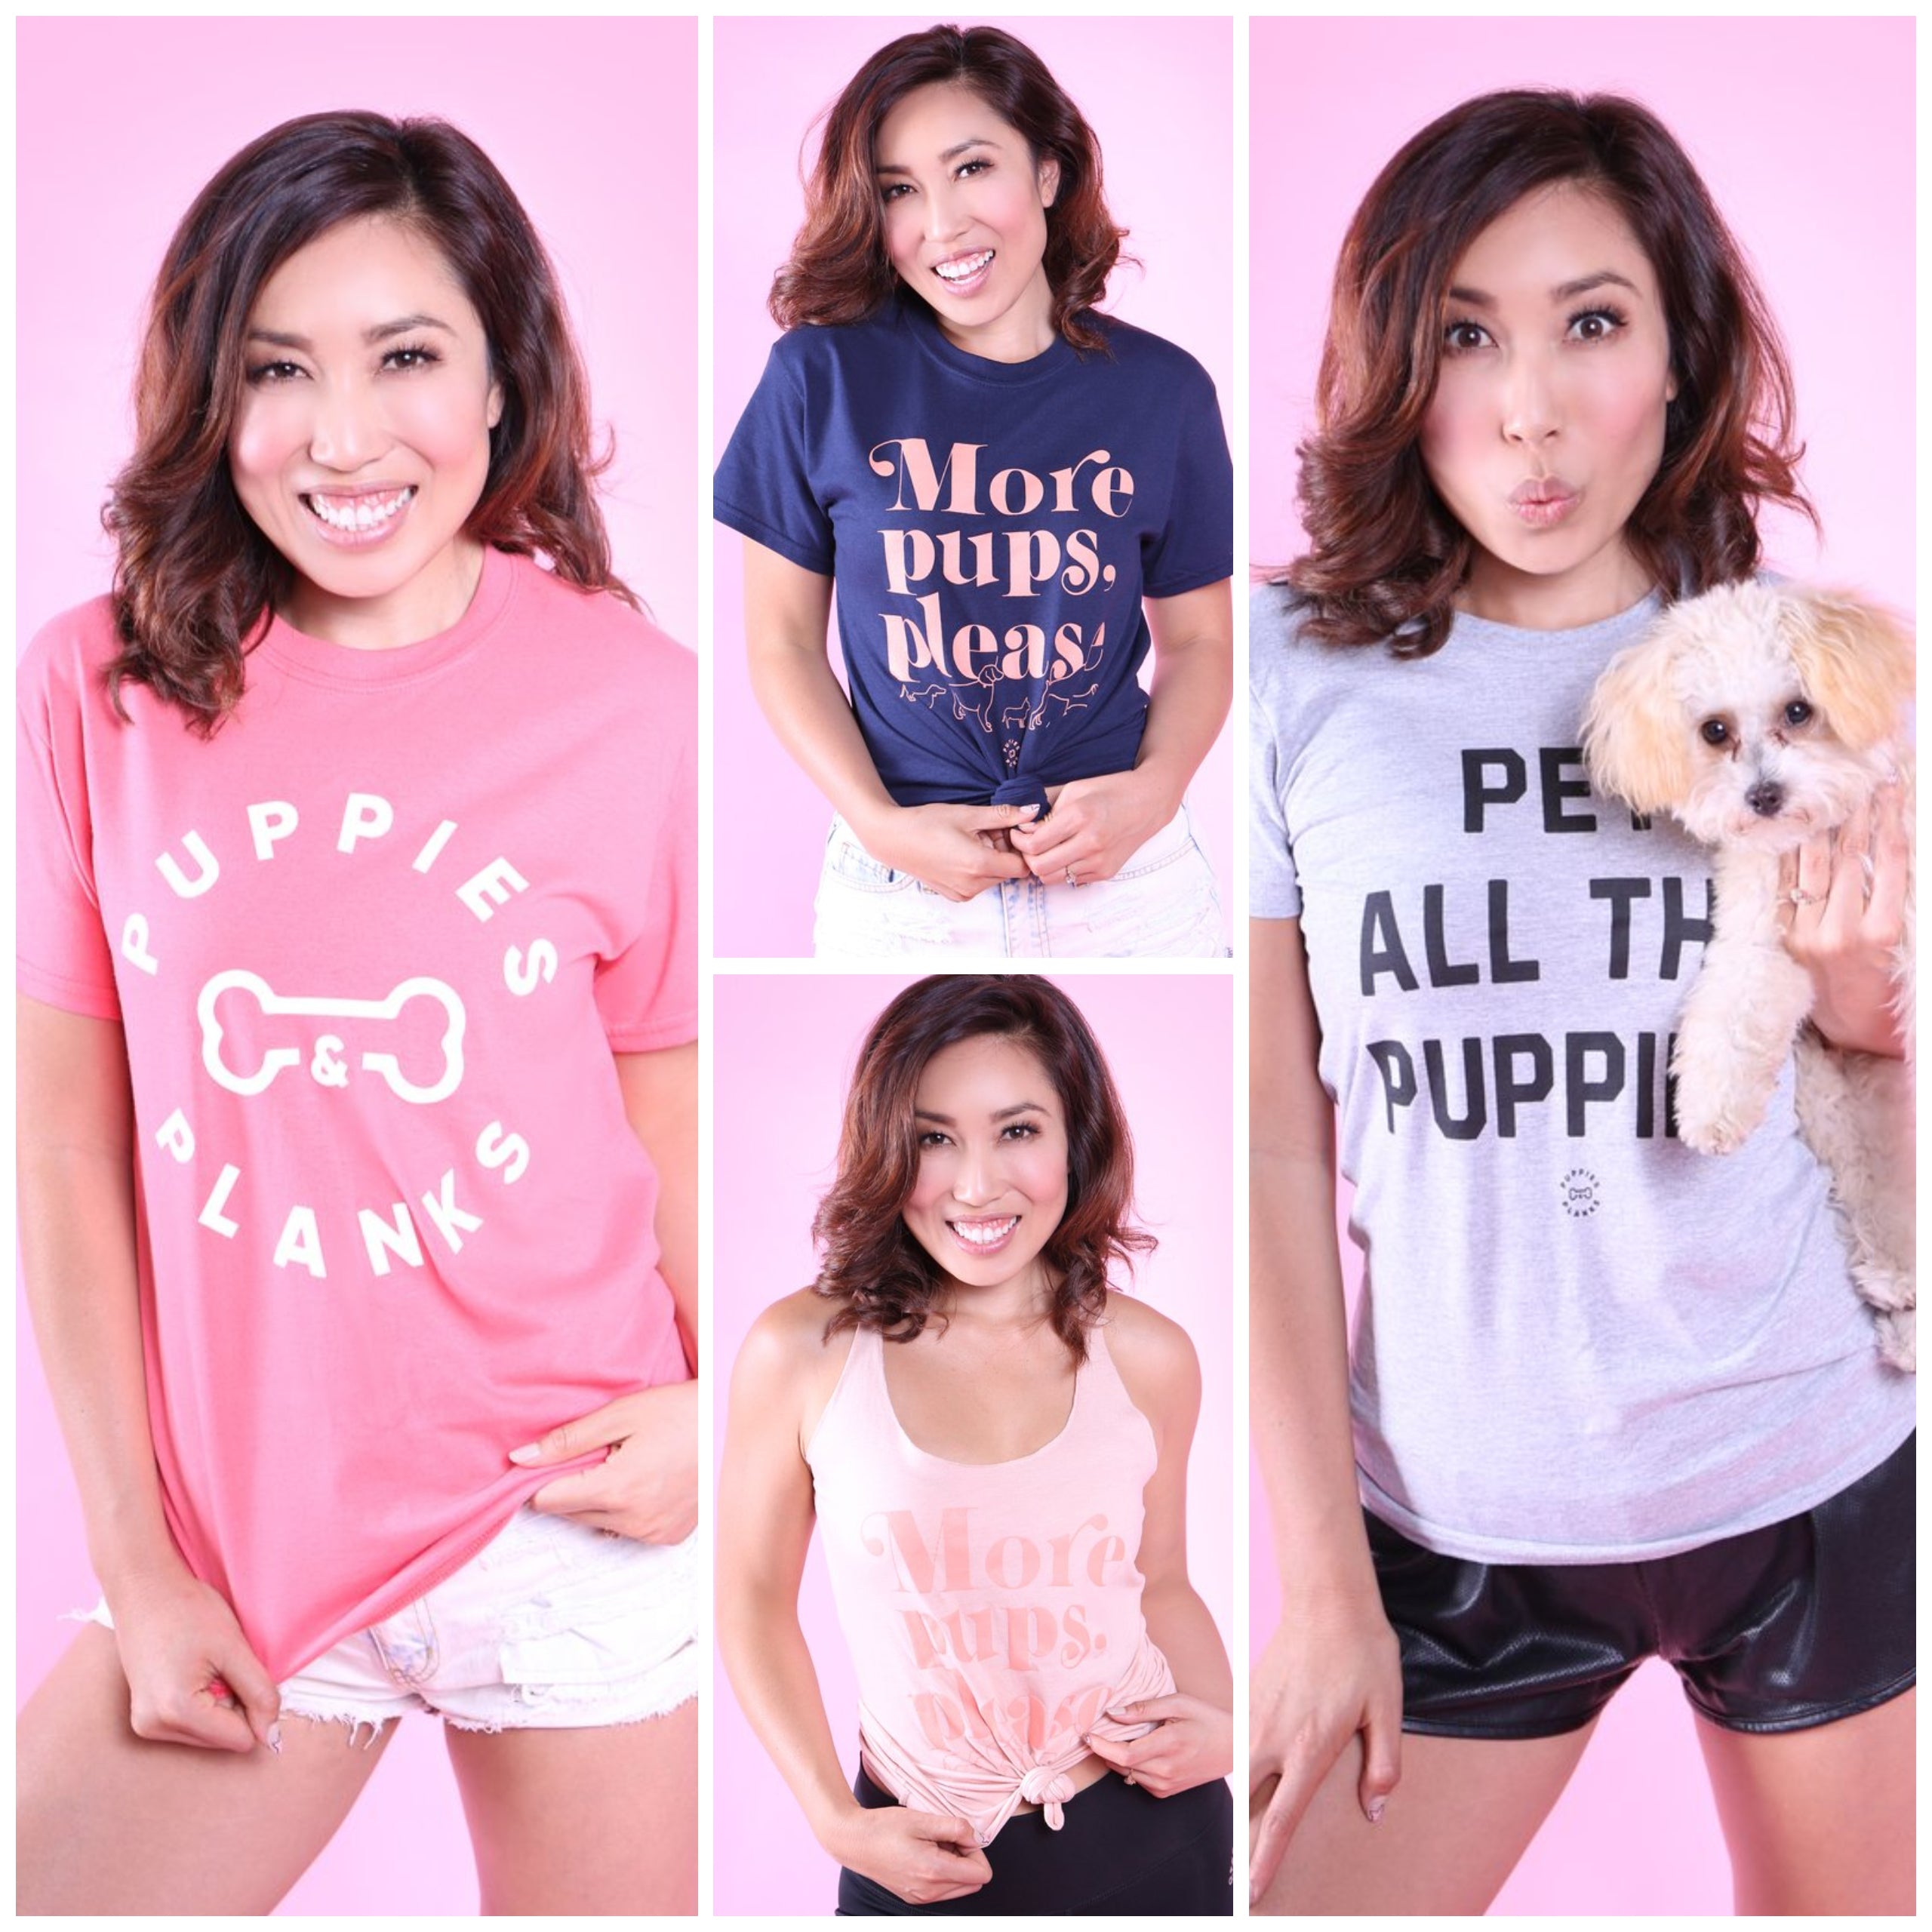 Puppies & Planks Shirts are Here!!